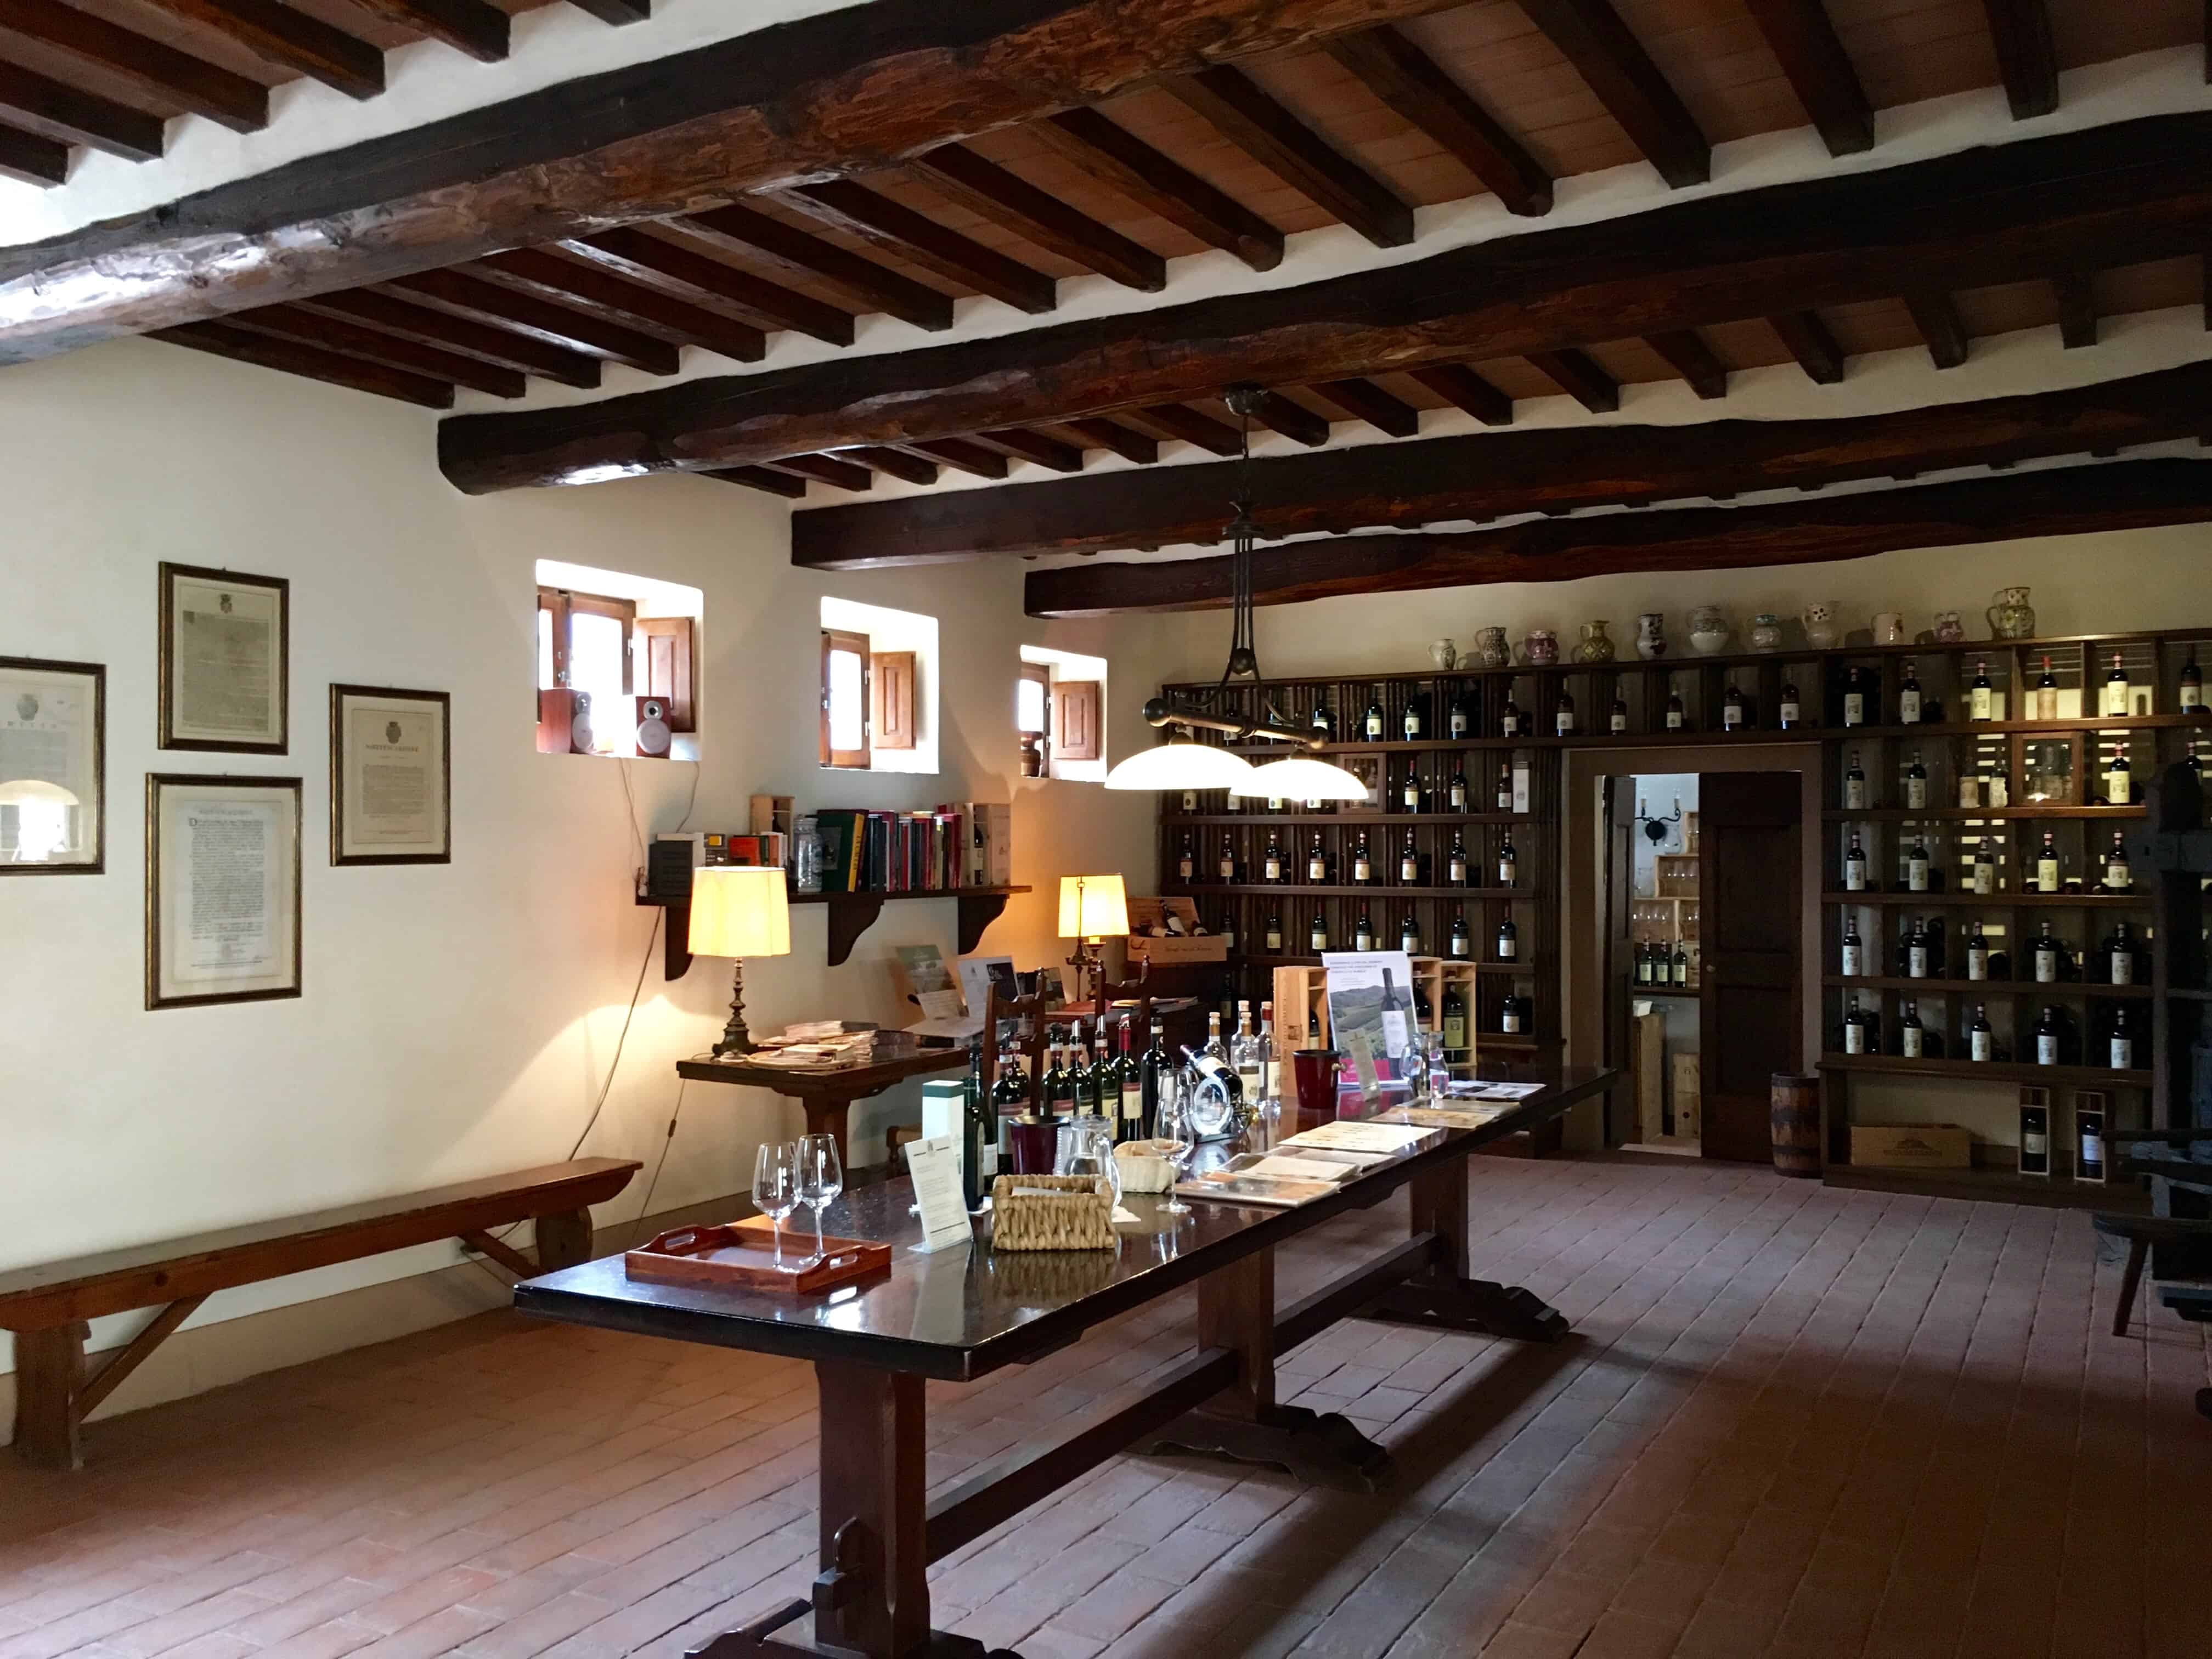 Tasting room at D'Abola winery